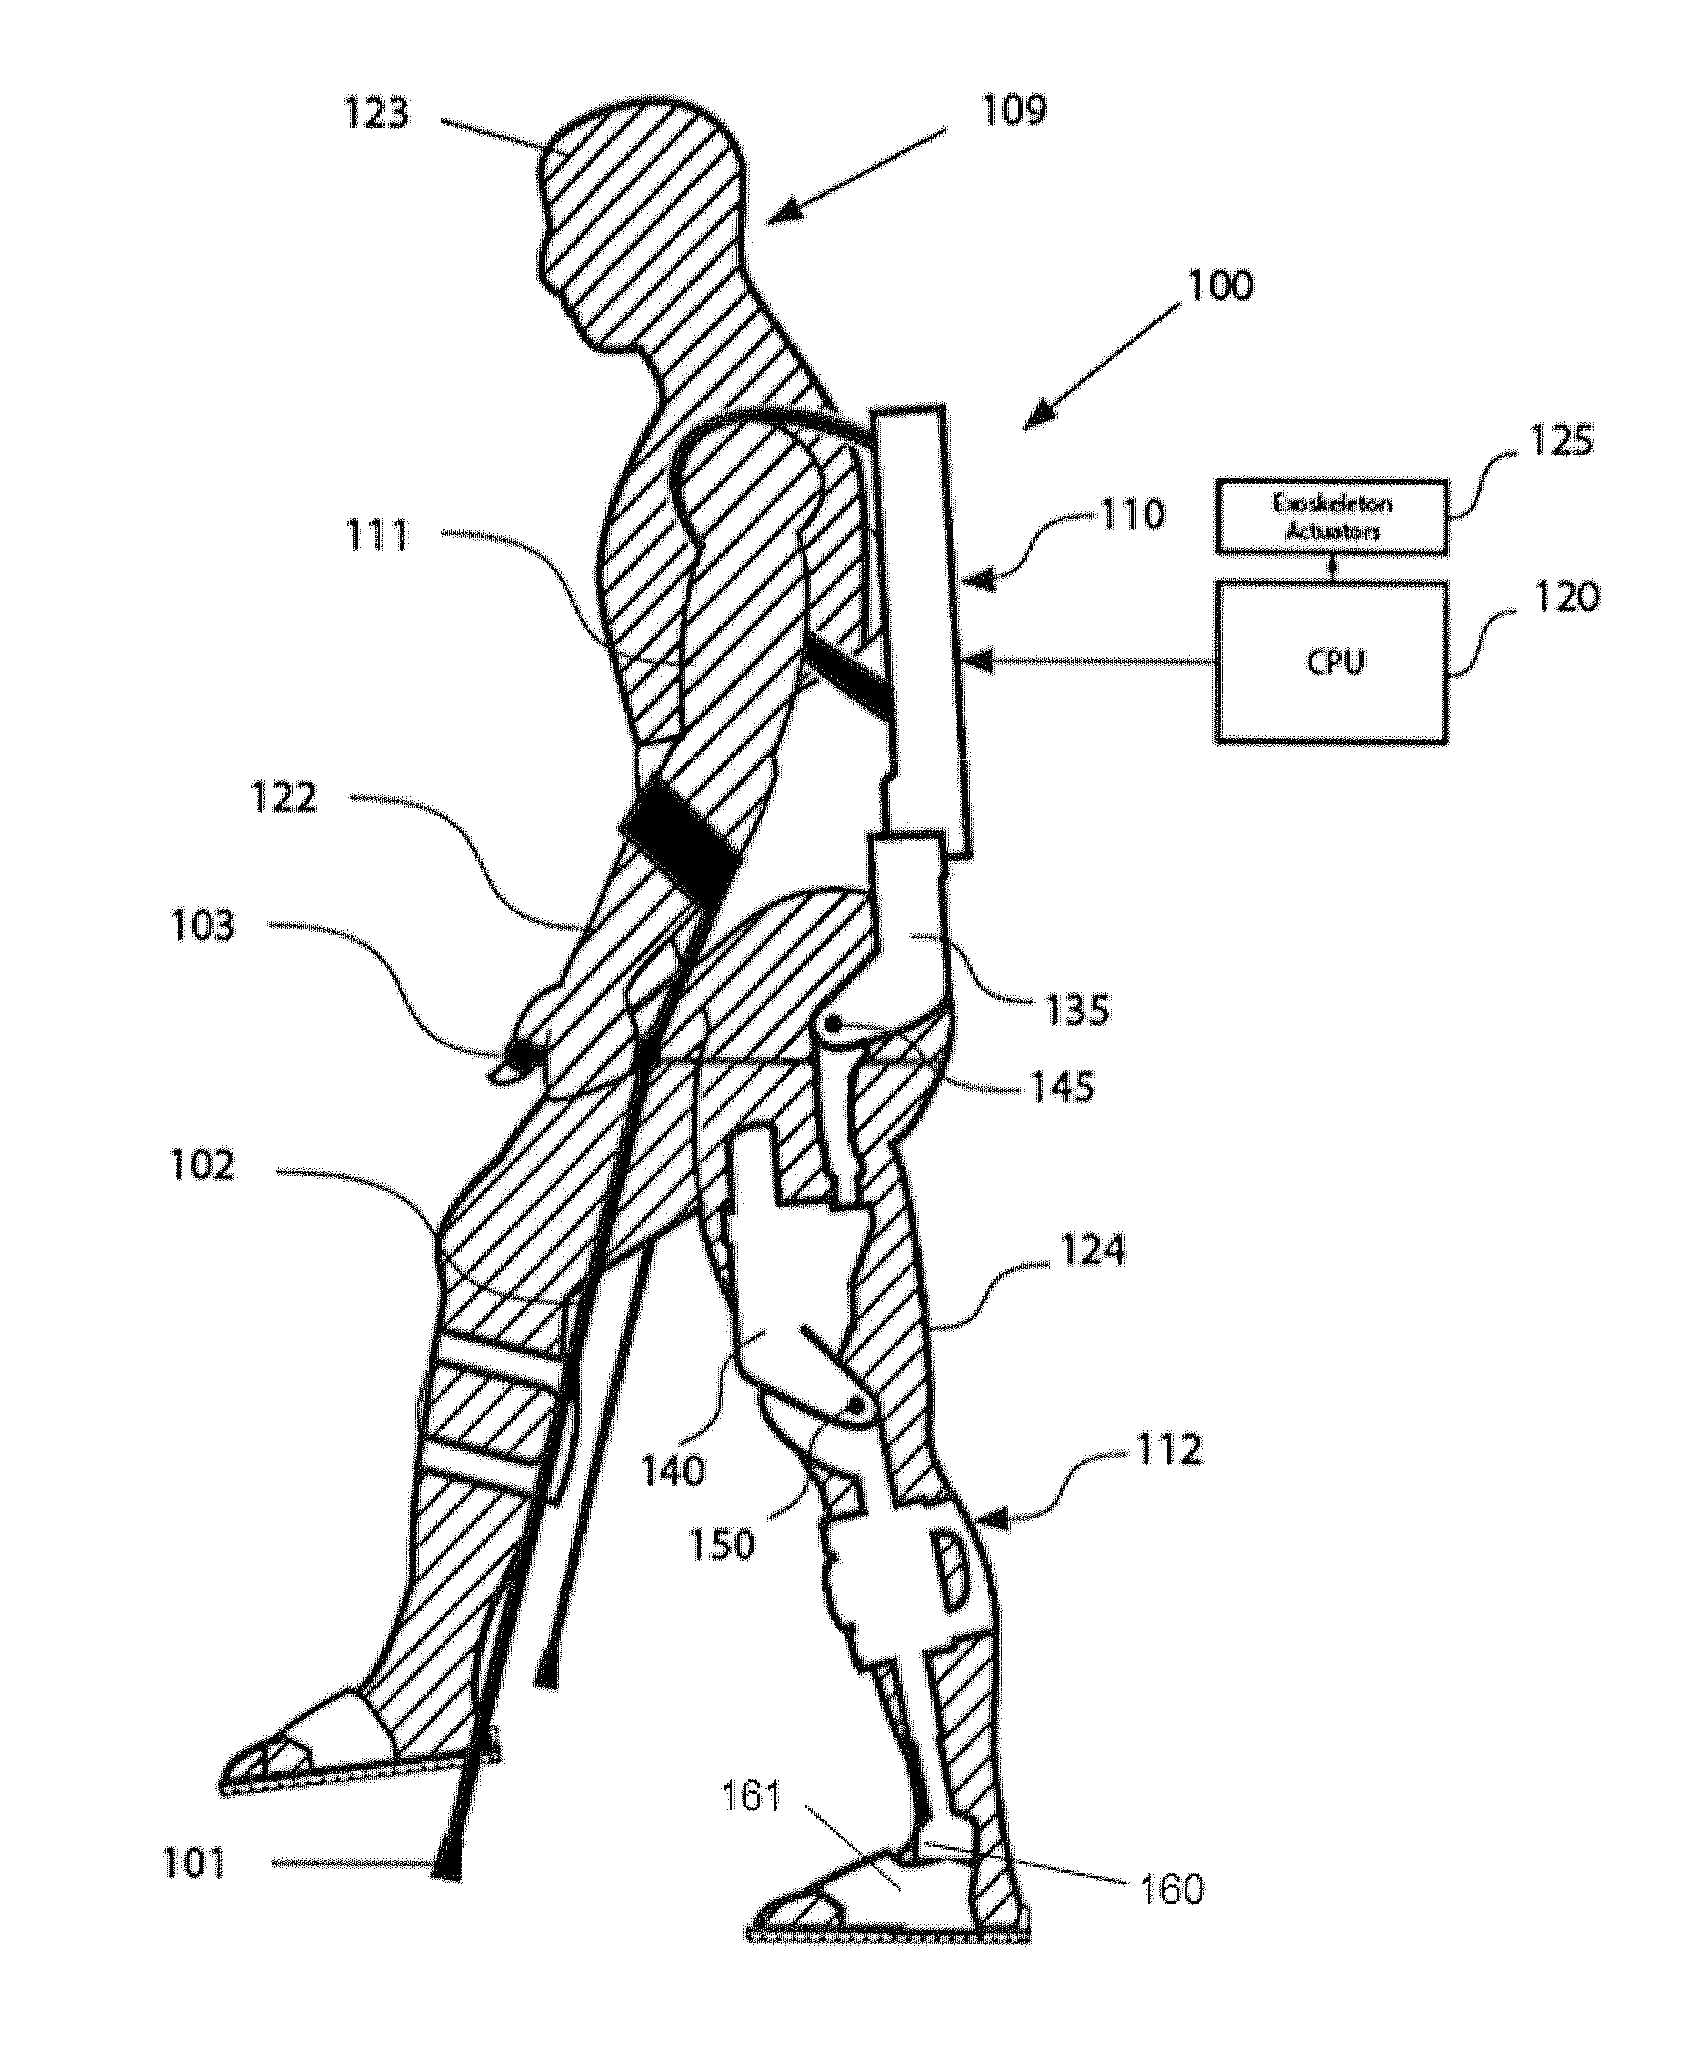 Machine to Human Interfaces for Communication from a  Lower Extremity Orthotic